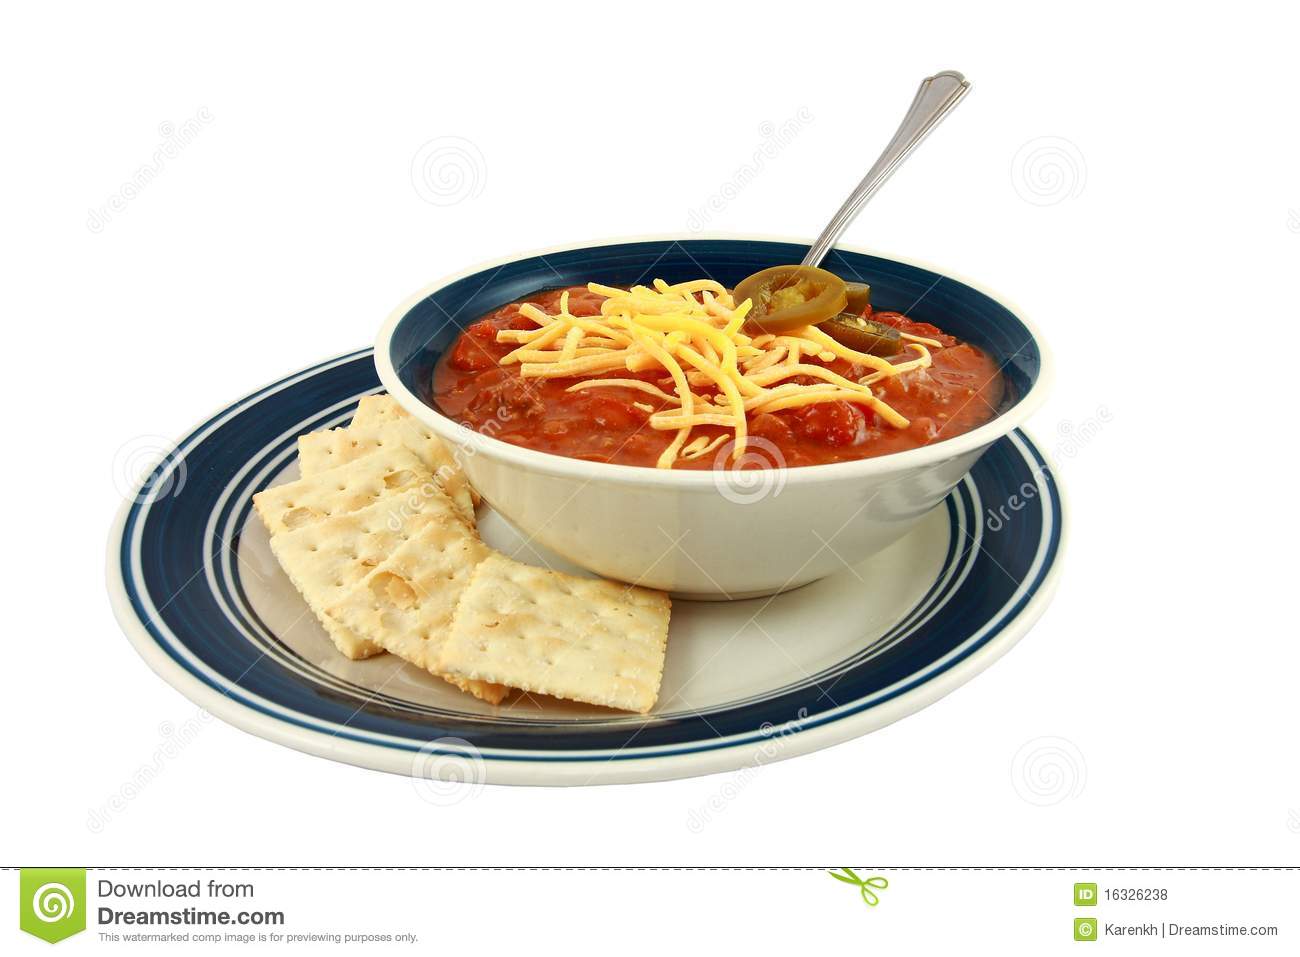 Bowl Of Spicy Chili With Cheese And Crackers Royalty Free Stock Photos    